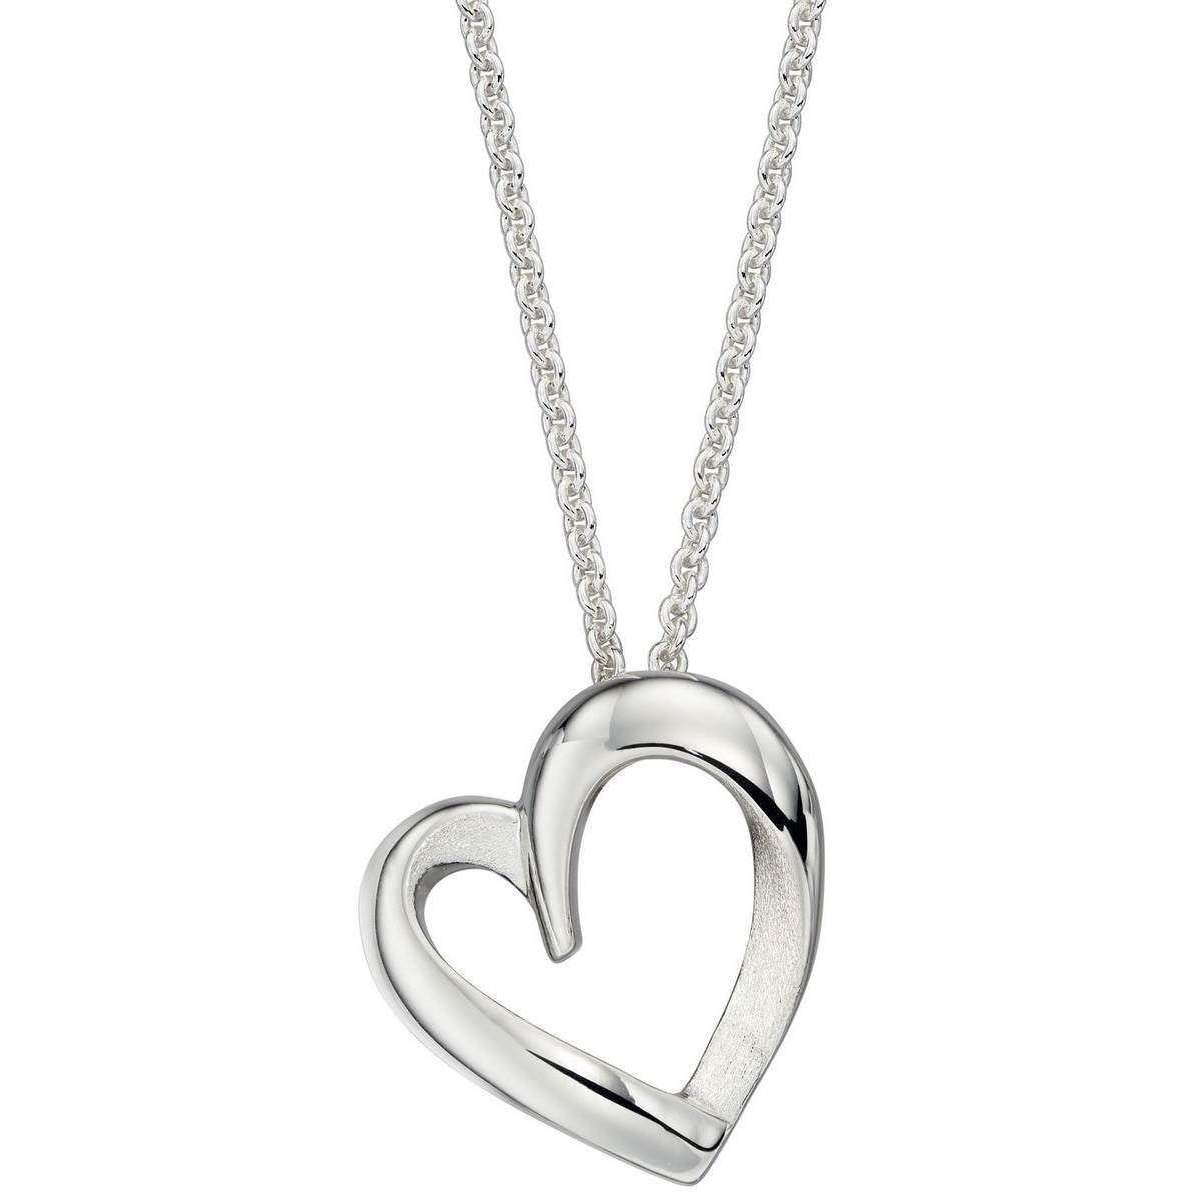 Elements Silver Textured Heart Pendant - Silver